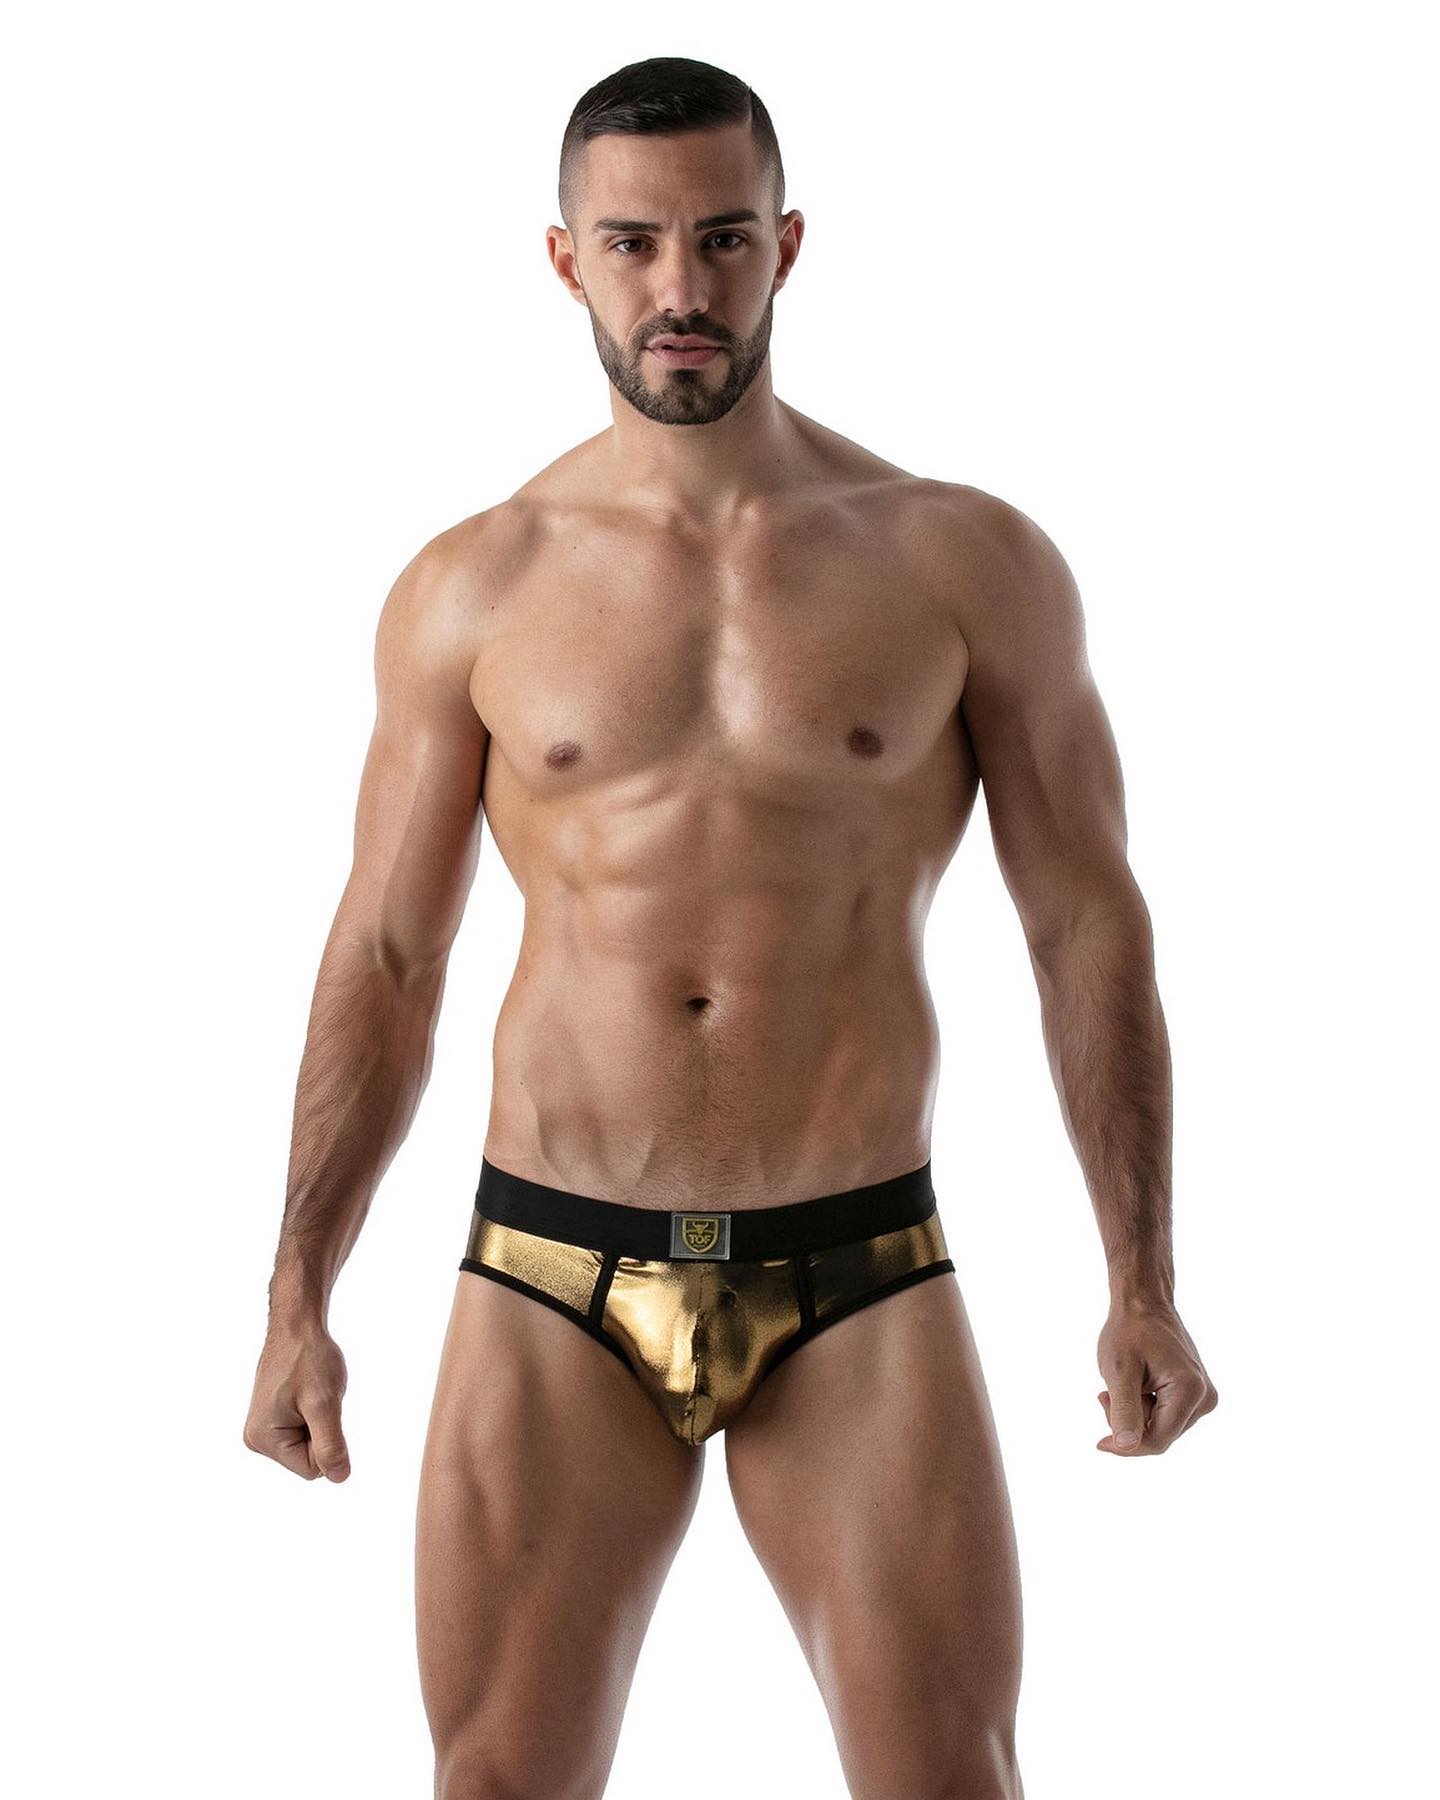 Go for gold! Top-quality briefs made with a technical coated fabric that stretches and shines like a star! Get it today:
_____
https://menandunderwear.com/shop/underwear/tof-paris-metal-briefs-golden-